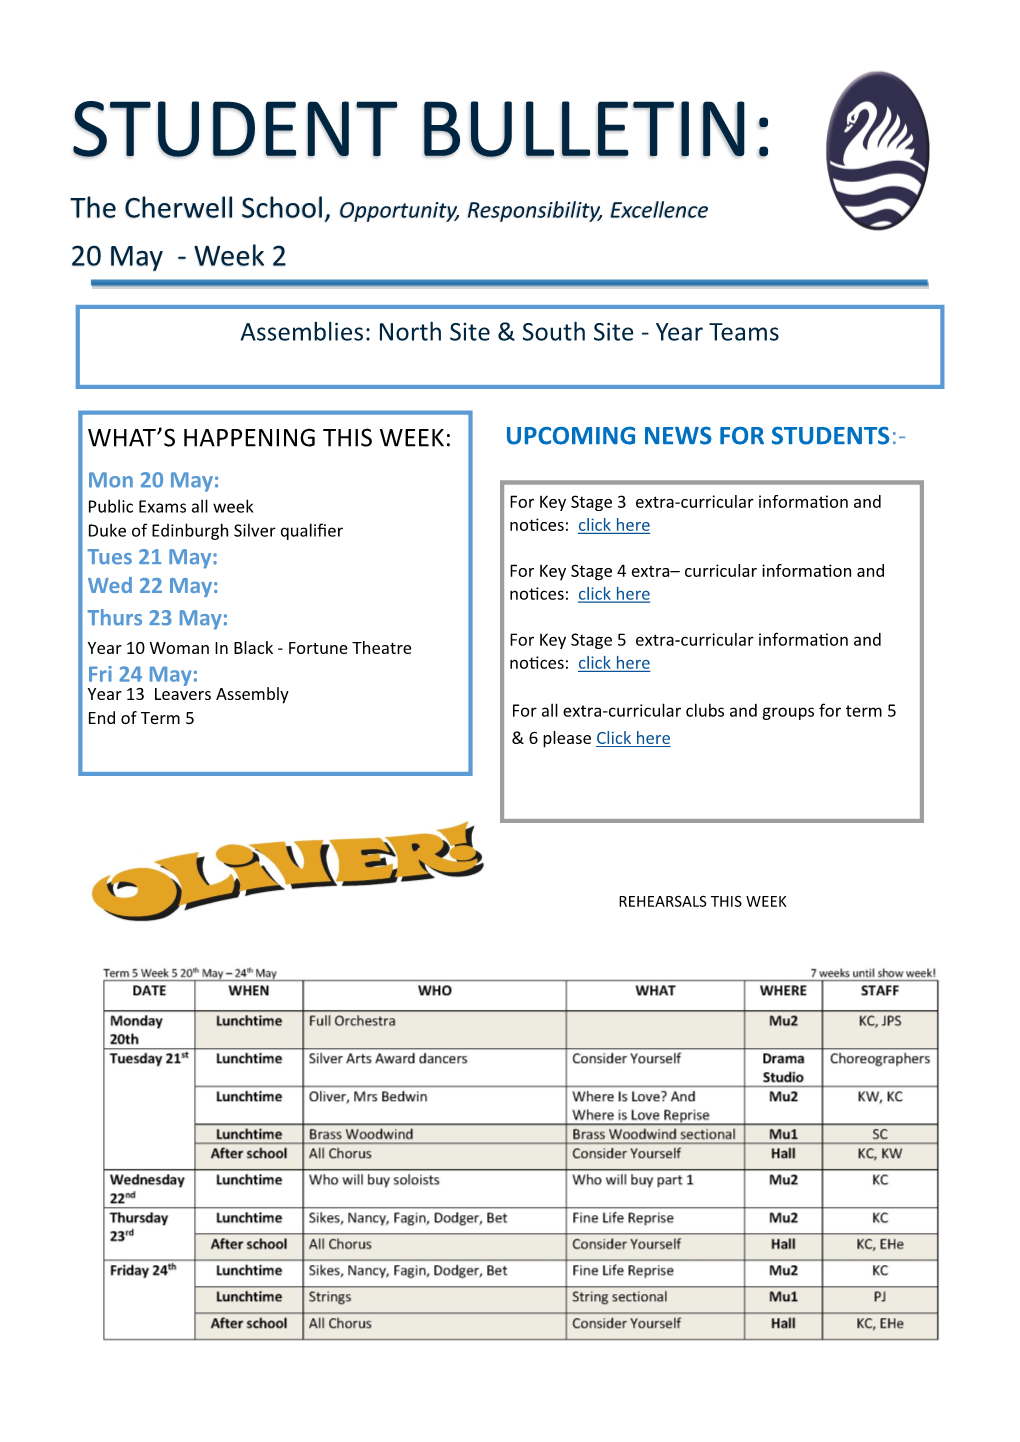 STUDENT BULLETIN: the Cherwell School, Opportunity, Responsibility, Excellence 20 May - Week 2